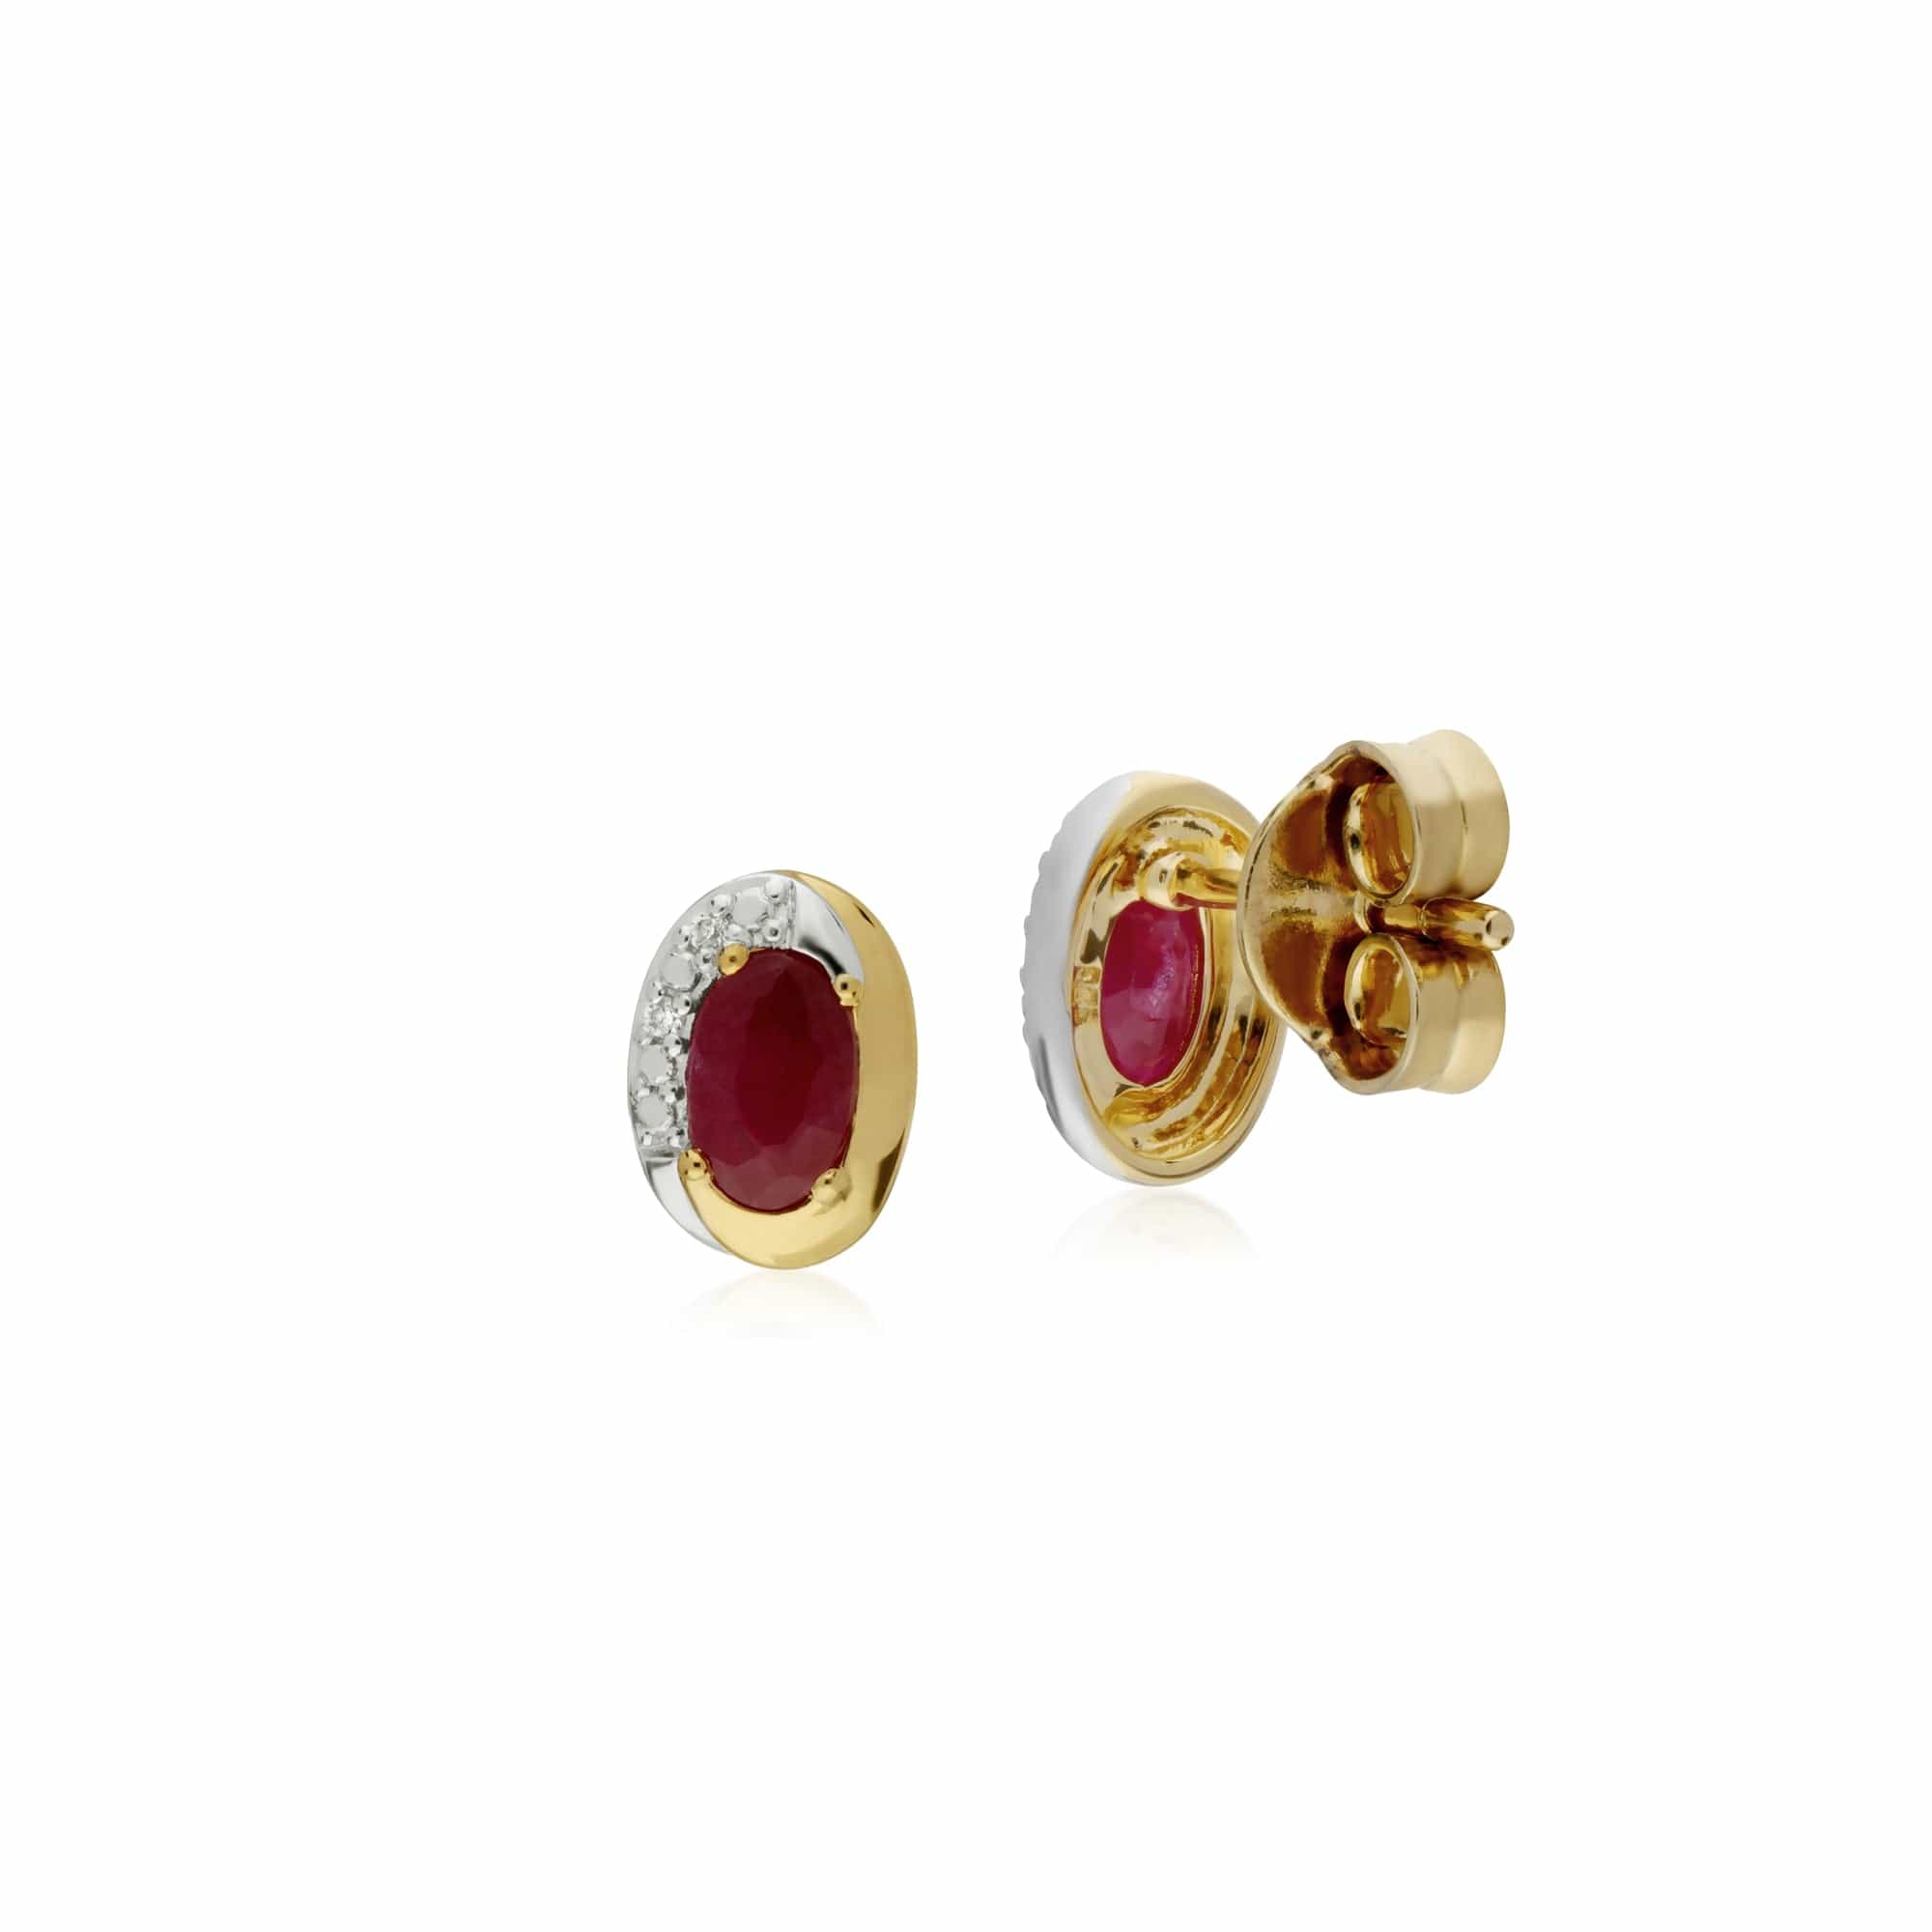 135E1554019 Classic Oval Ruby & Diamond Stud Earrings in Two Tone 9ct Yellow Gold 2